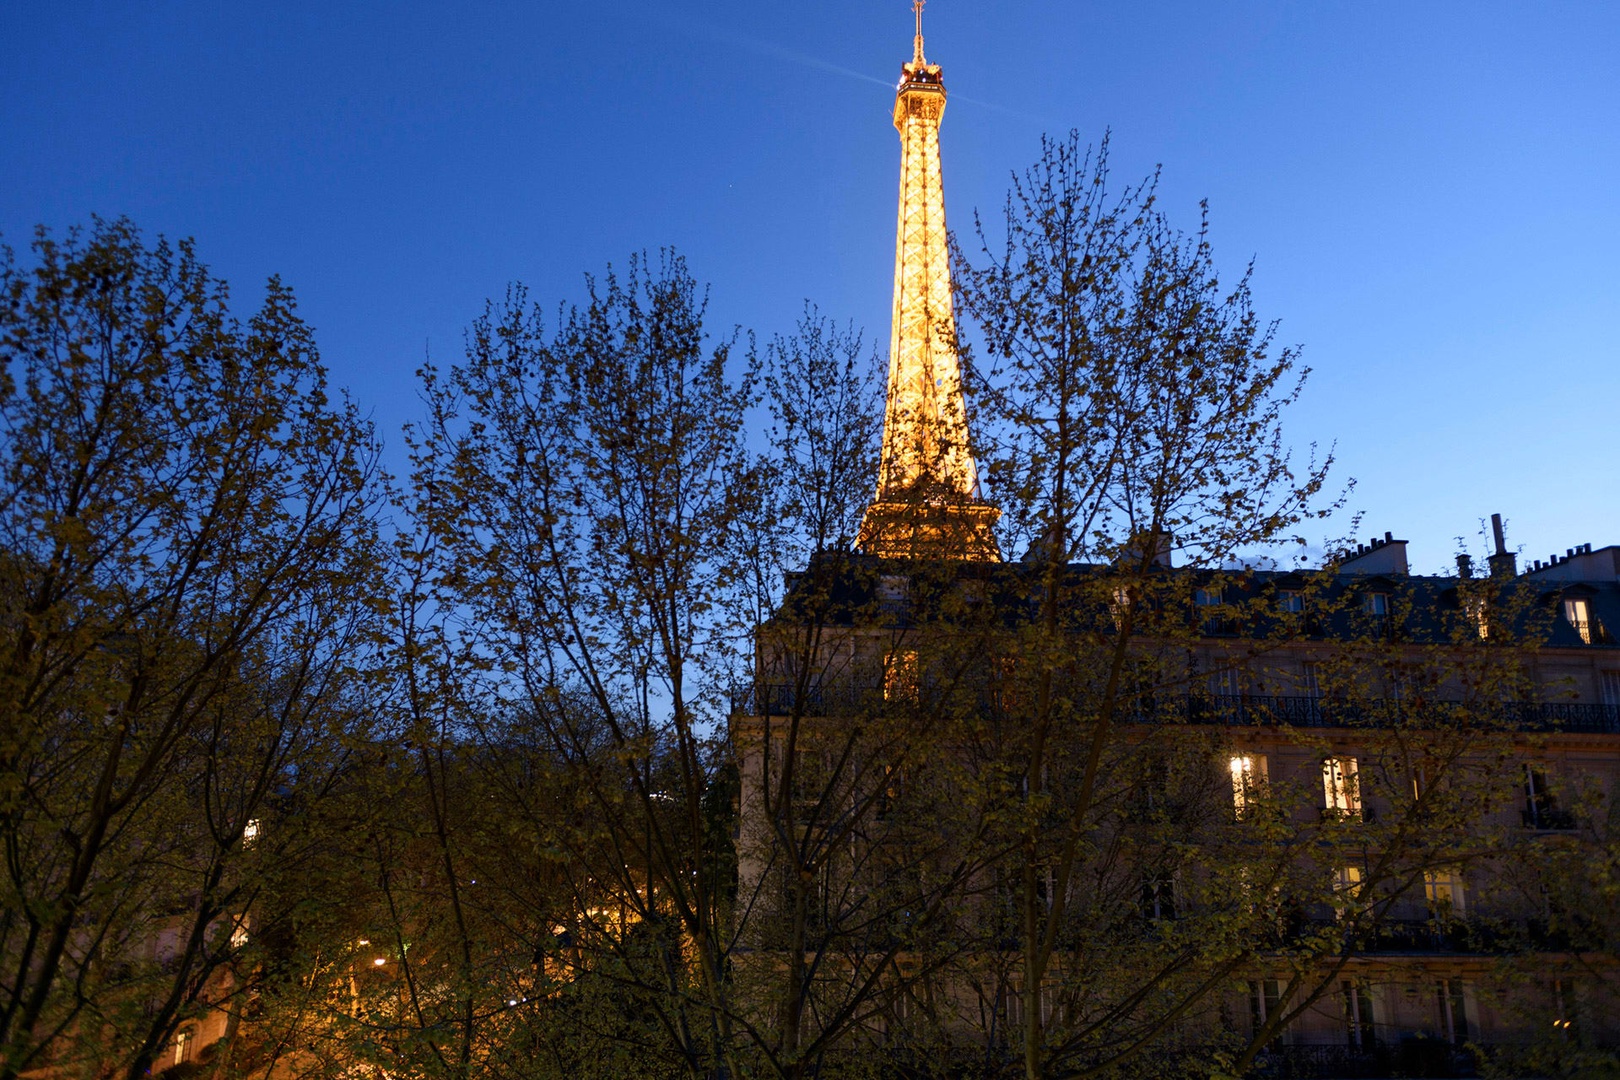 Enjoy stunning view of the Eiffel Tower from the Calvados balcony.